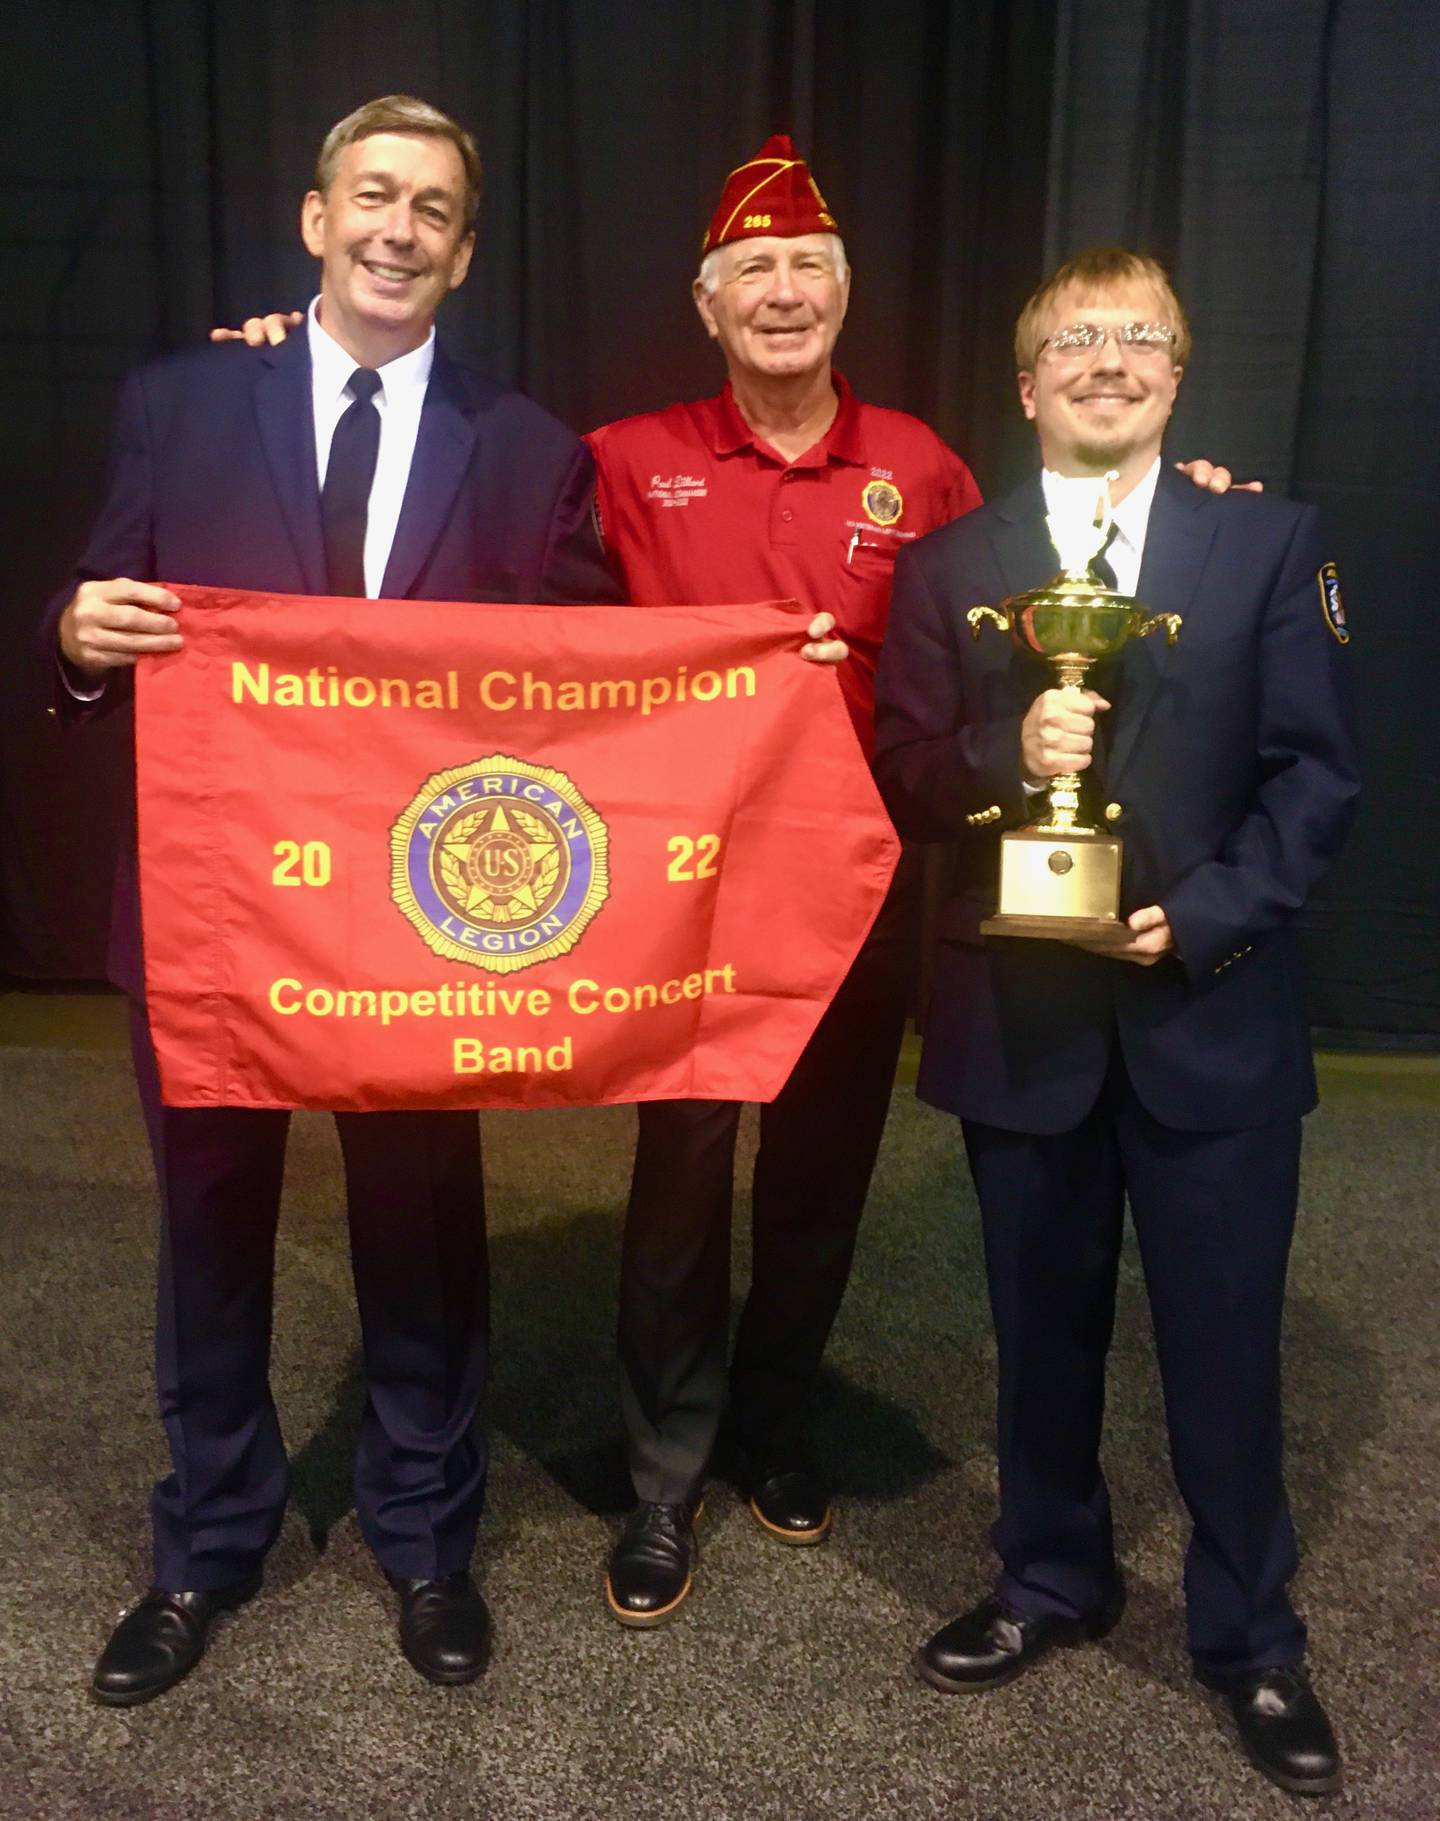 The Joliet American Legion Band again showed its championship on Aug. 28 by winning the American Legion’s 2022 National Concert Band Contest in Wisconsin. Pictured, from left, are the Joliet American Legion Band Director Michael Fiske, the 2021 to 2022 National Commander of The American Legion Paul Dillard, and the 2021 and 2022 Joliet American Legion Band President Matthew R. Witt.